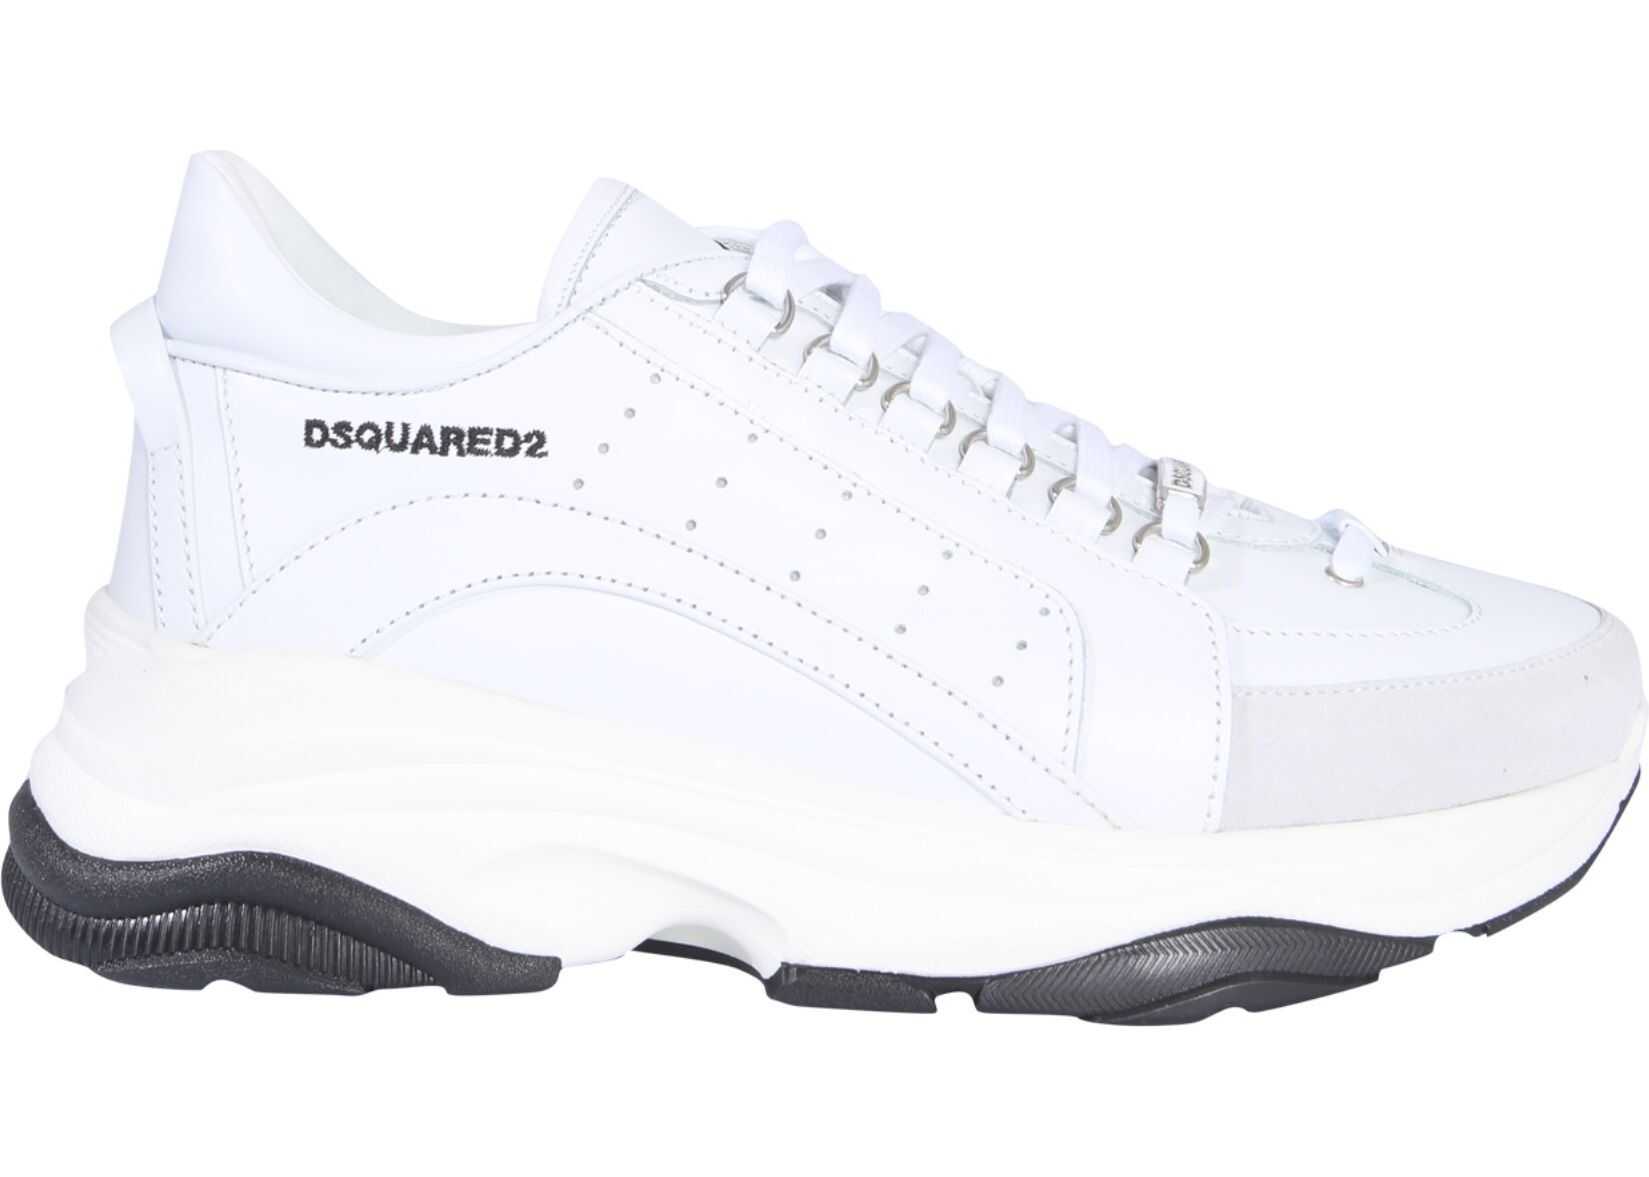 DSQUARED2 Pumpy 551 Sneakers WHITE